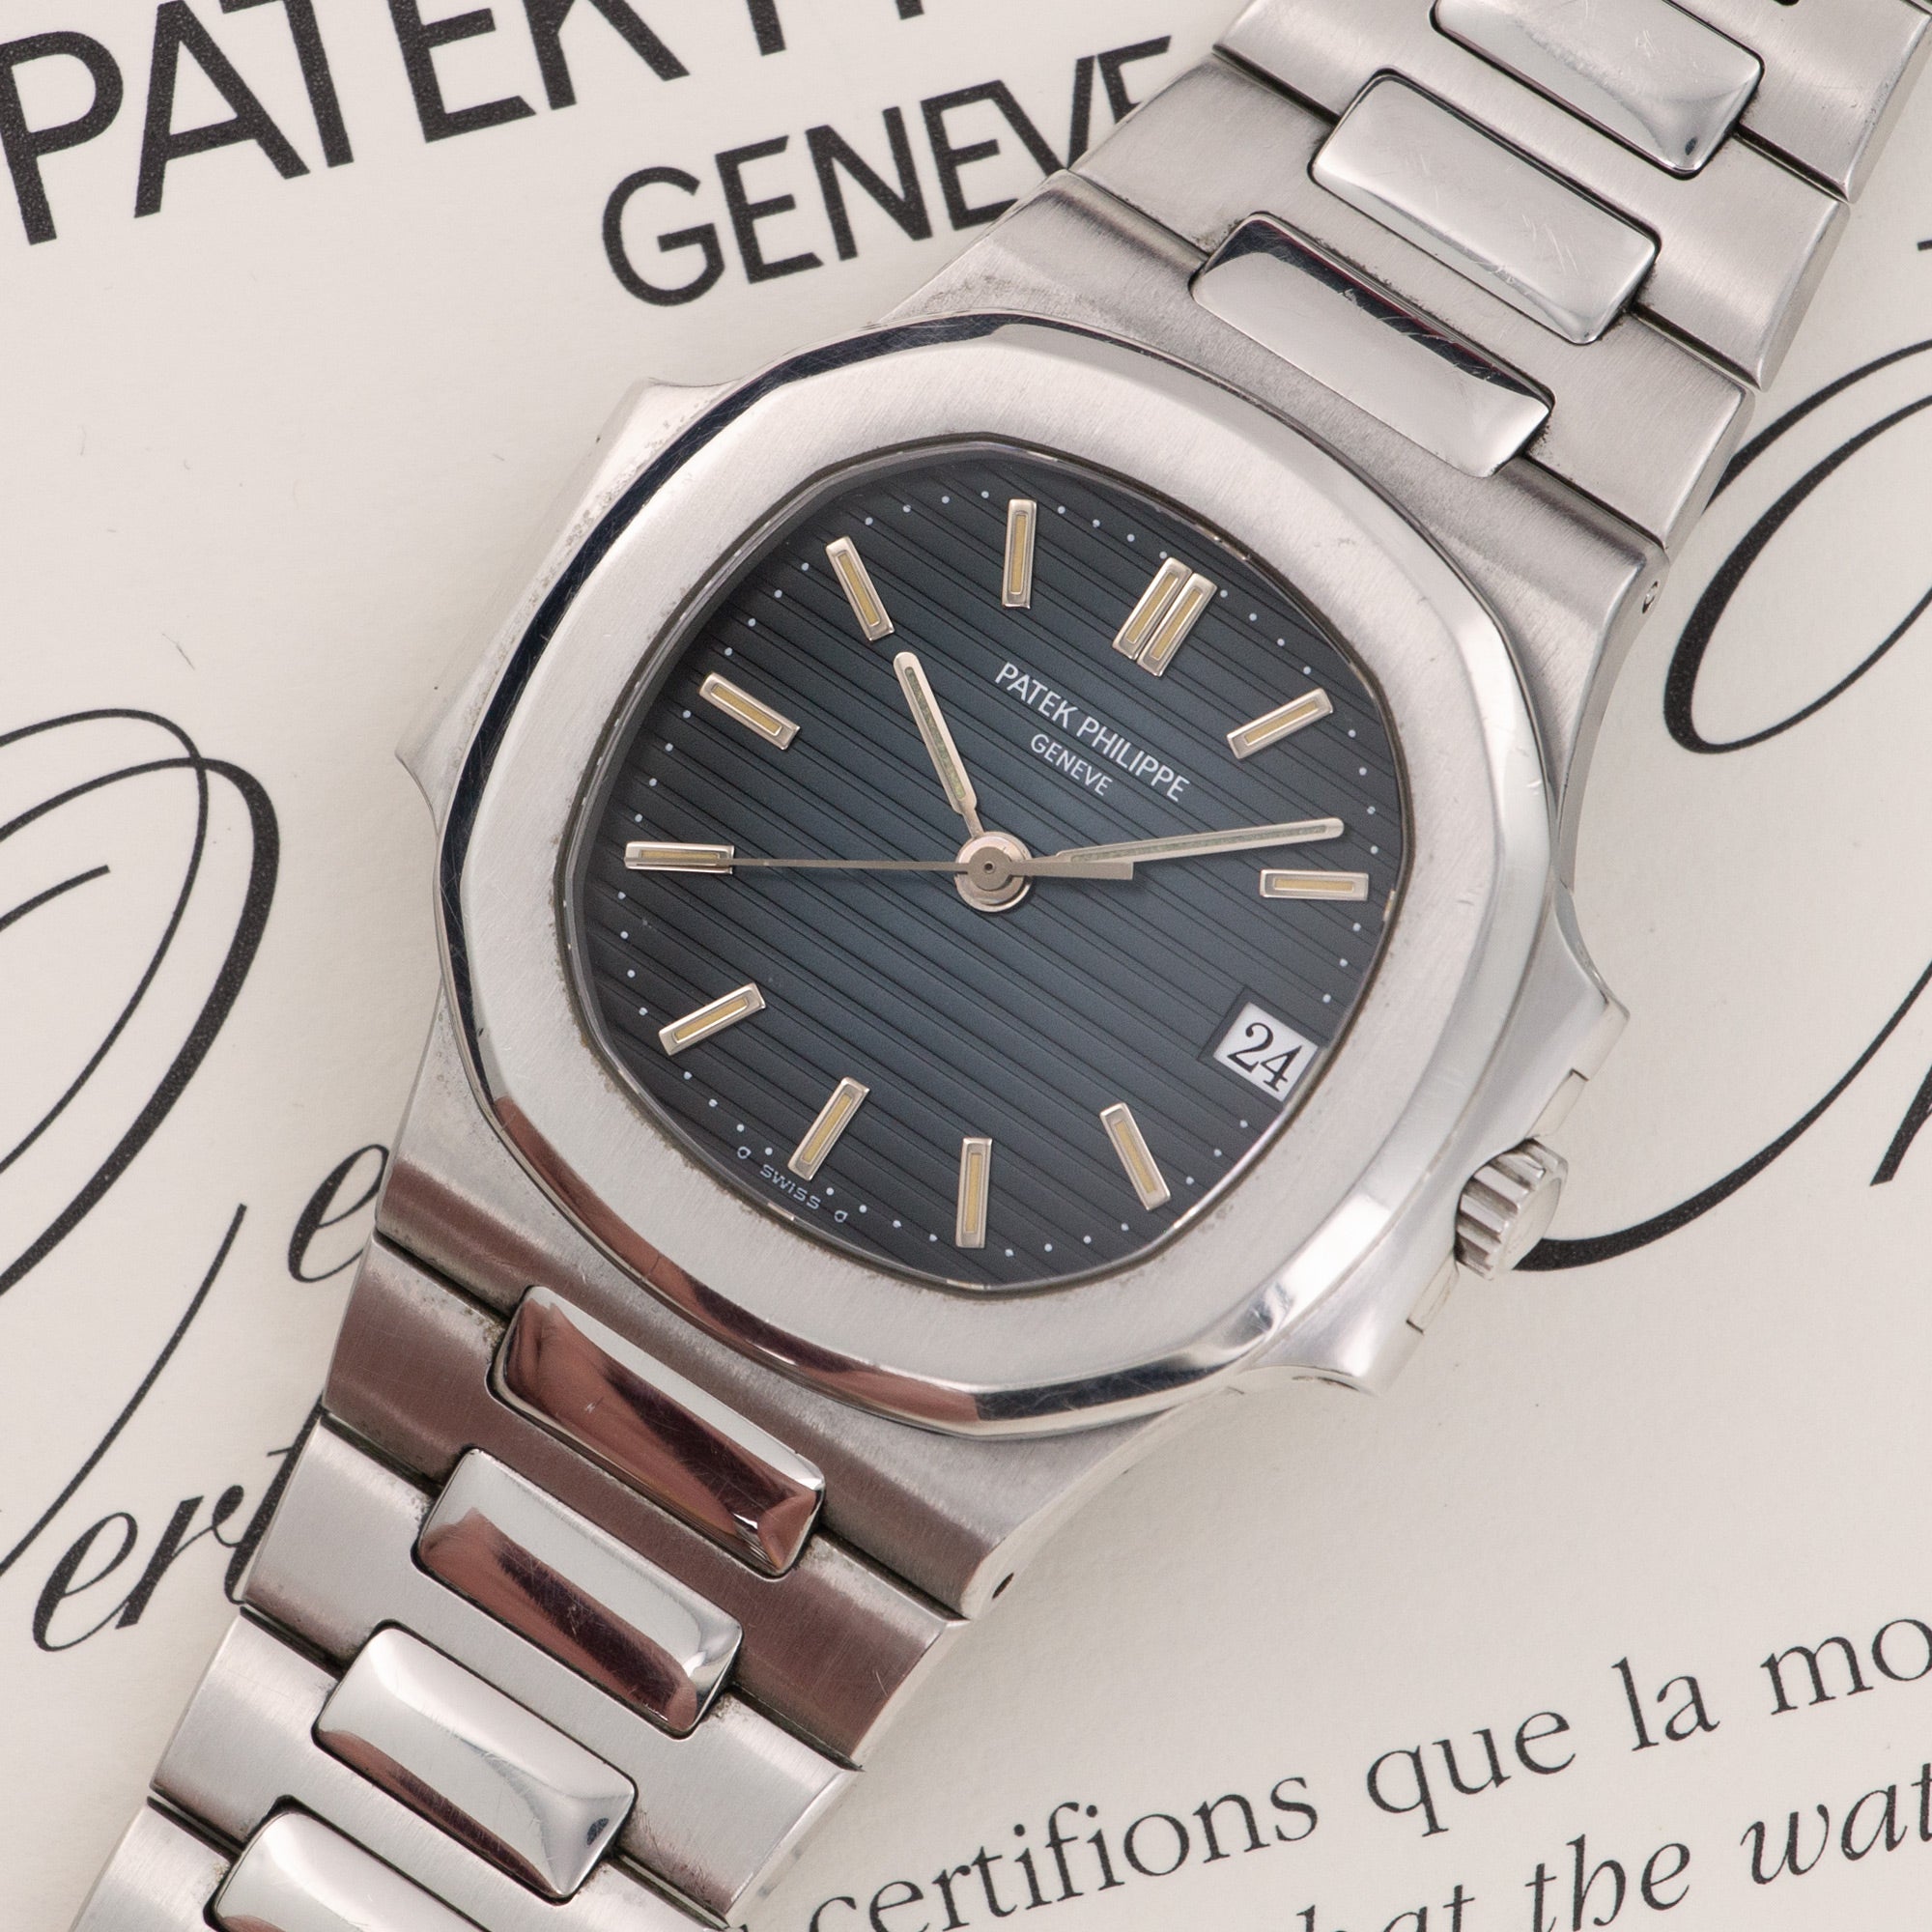 Patek Philippe - Patek Philippe Steel Nautilus Watch Ref. 3800 with Original Box and Papers - The Keystone Watches